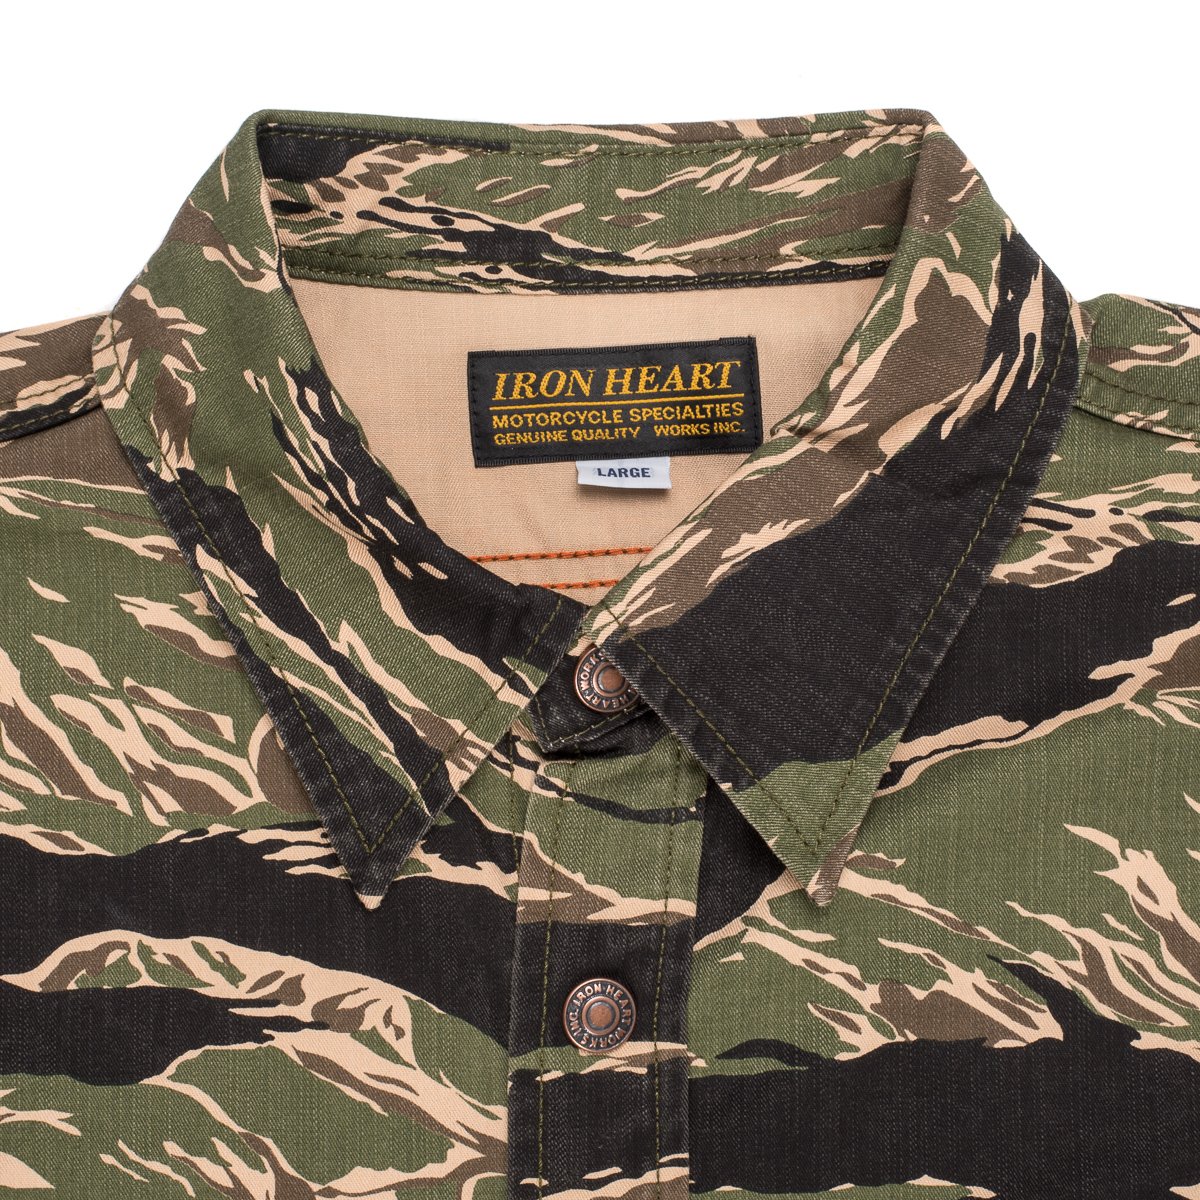 IHSH-186-GRN | Green Tiger Stripe Camouflage CPO Shirt. Made in Japan.